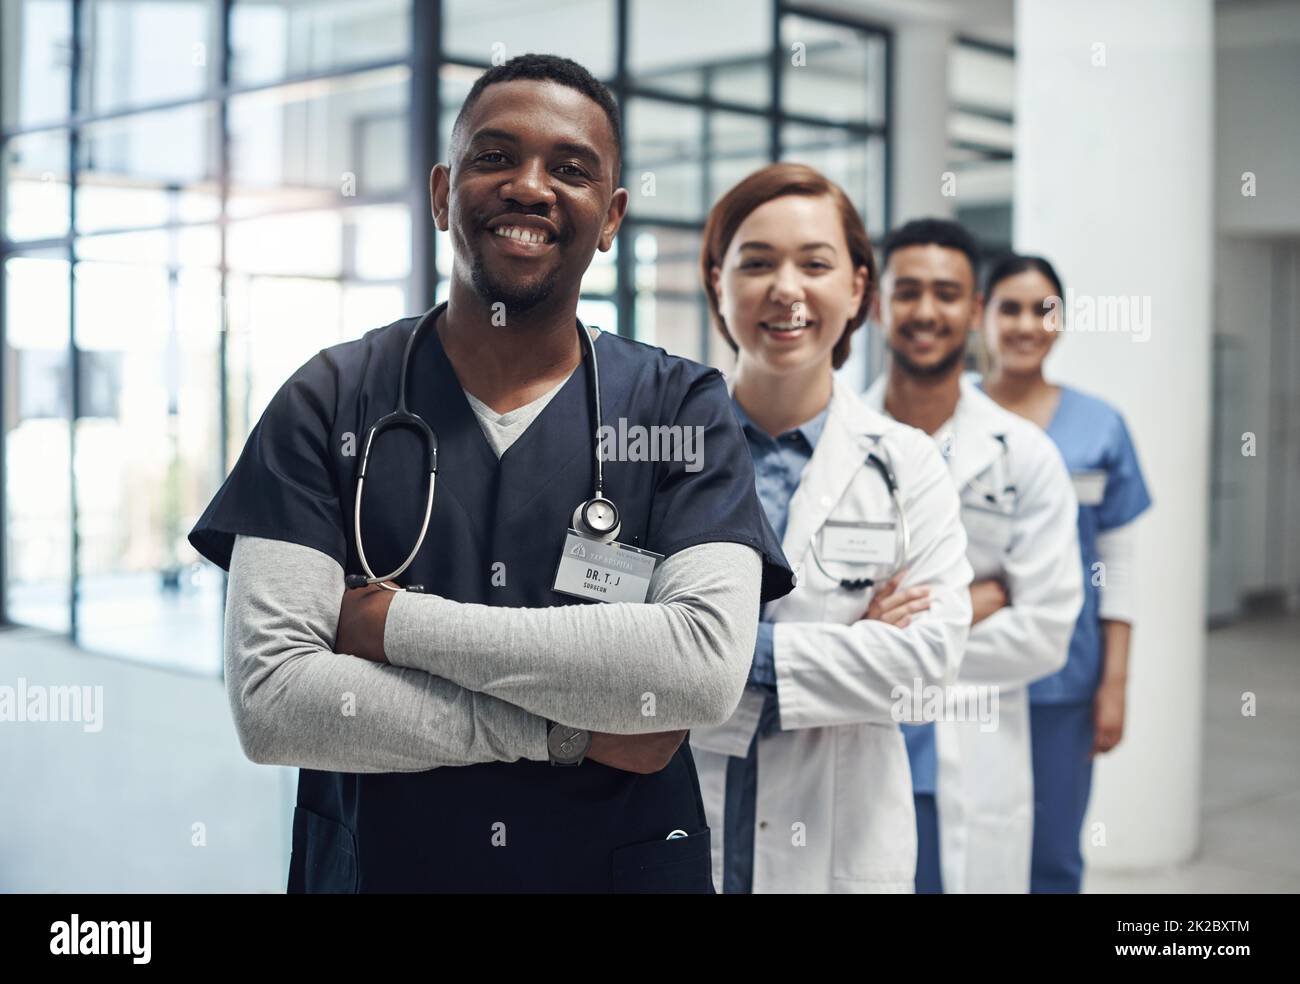 Not all heroes wear capes some wear labcoats. Shot of a group of medical staff together at work. Stock Photo